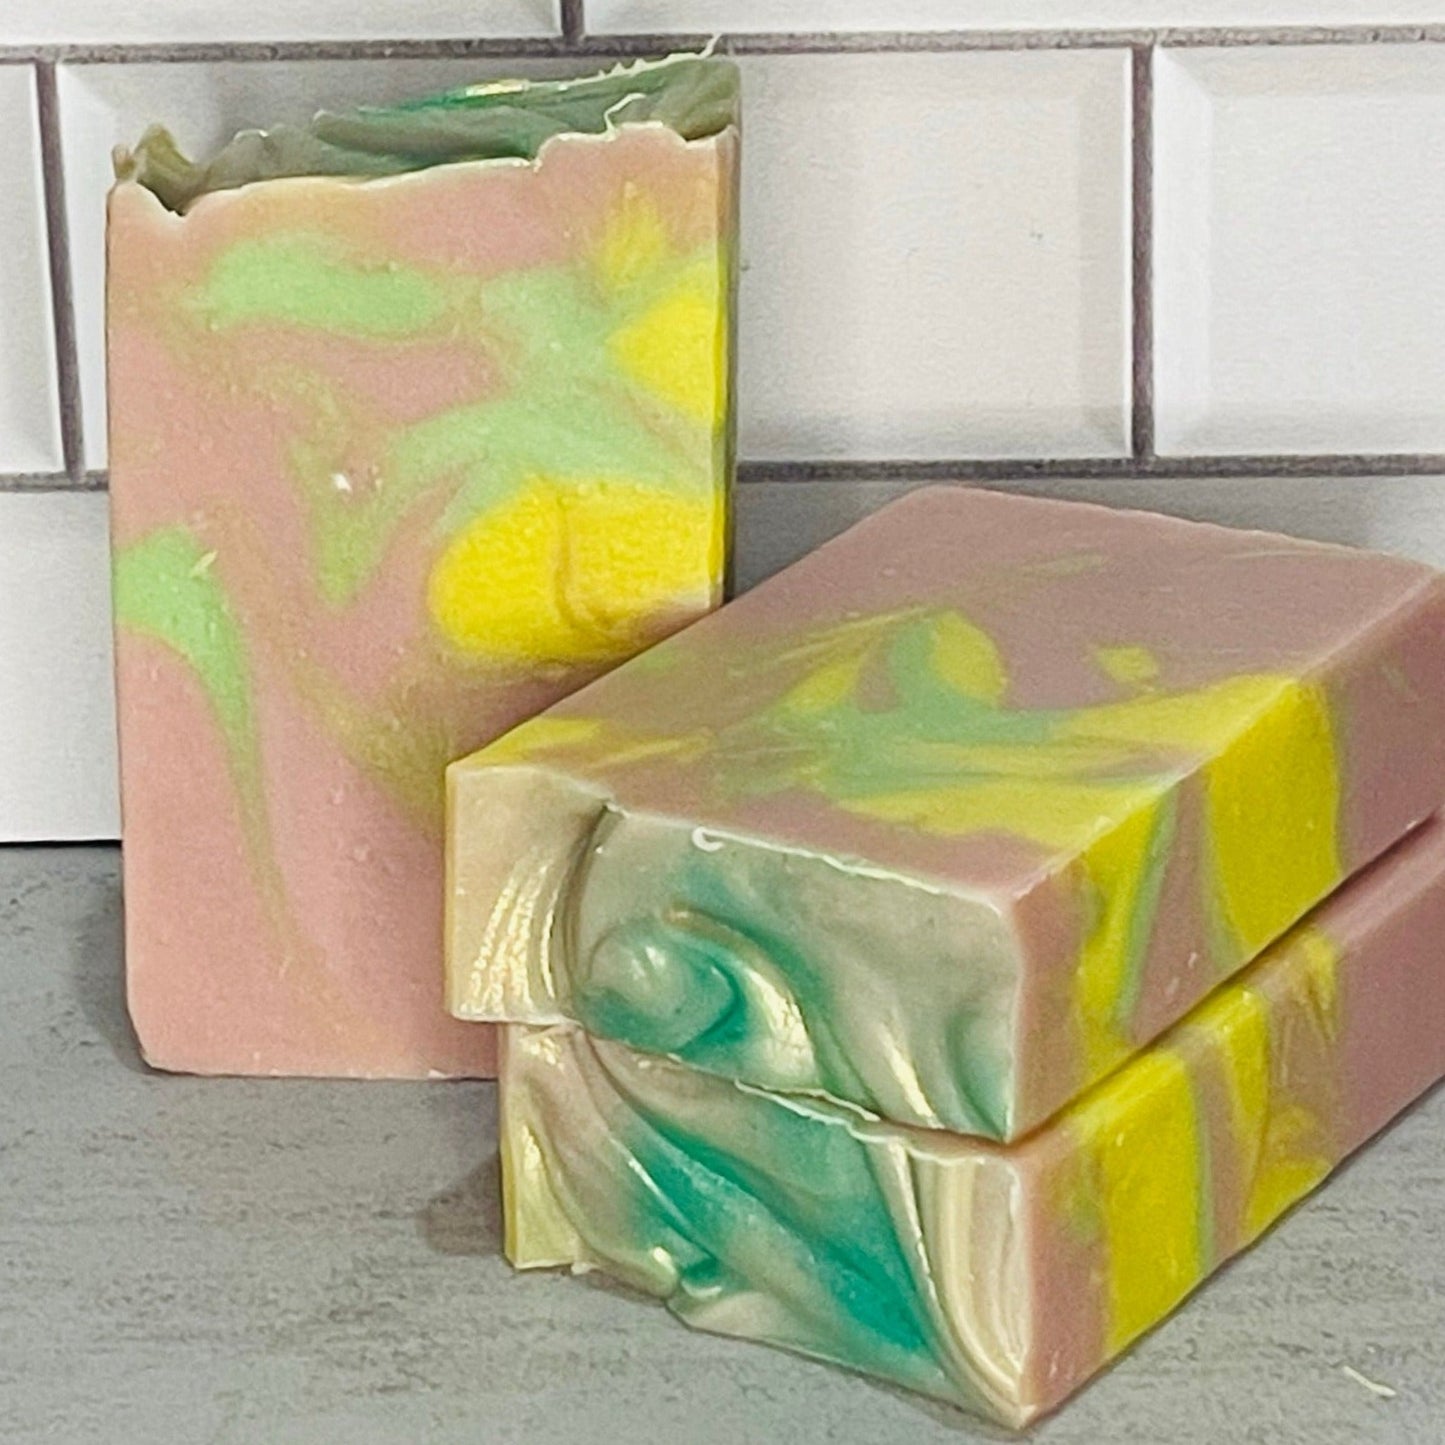 Peach, Grapefruit, and Thyme Handmade Cold Process Soap Bar